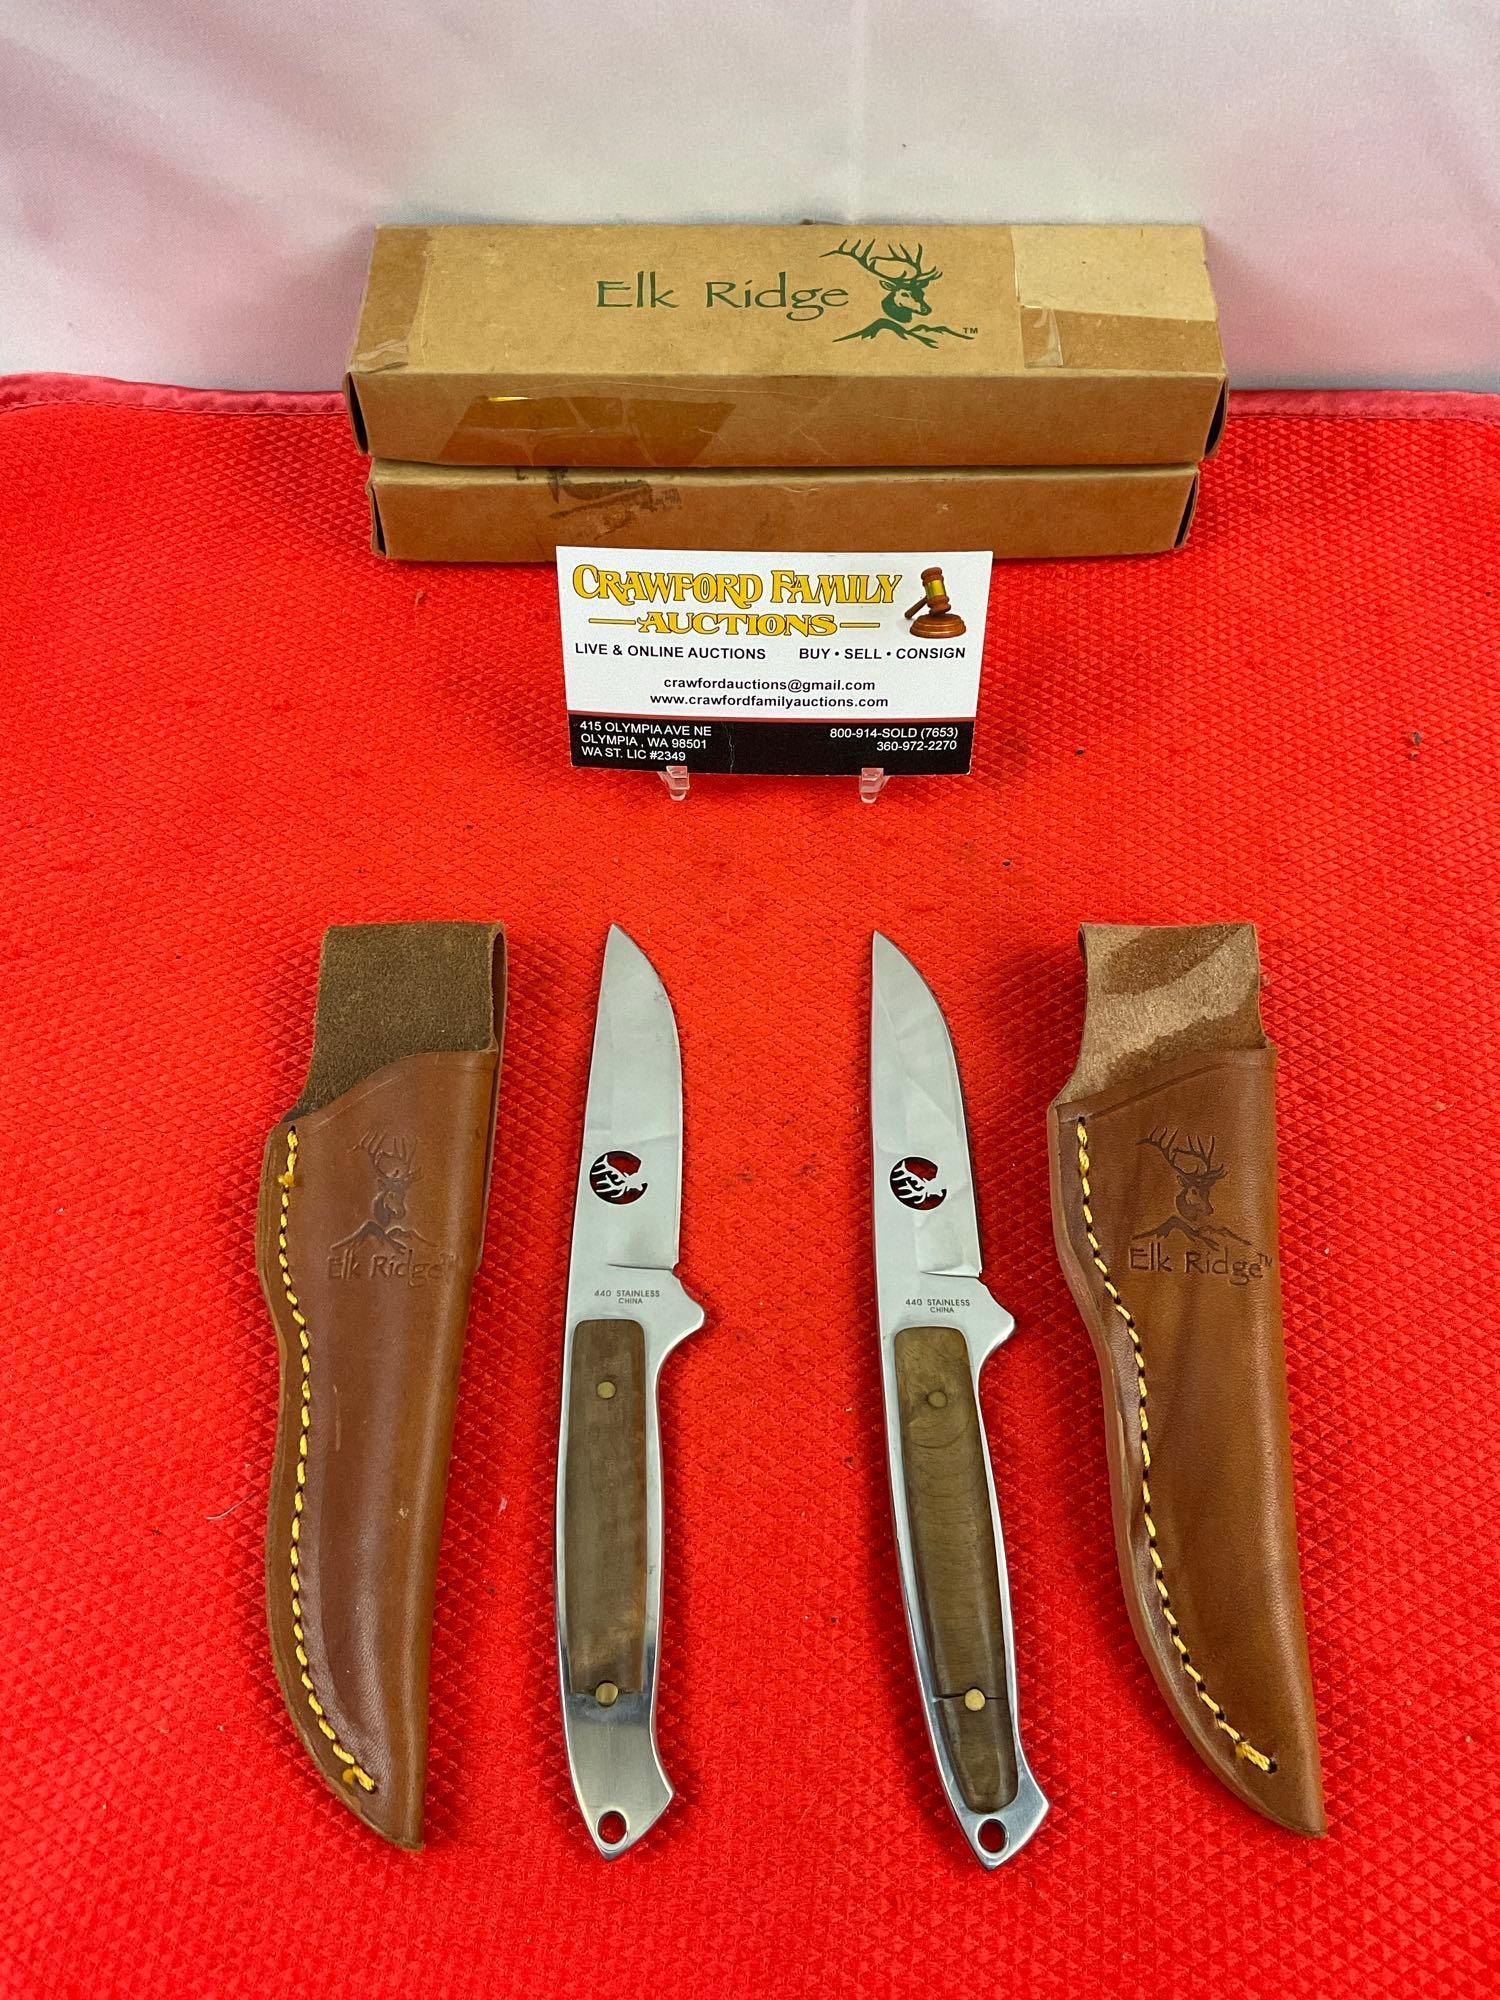 Pair of Elk Ridge 440 Stainless Steel 3" Fixed Blade Hunting Knives w/ Sheathes Model ER-048. See